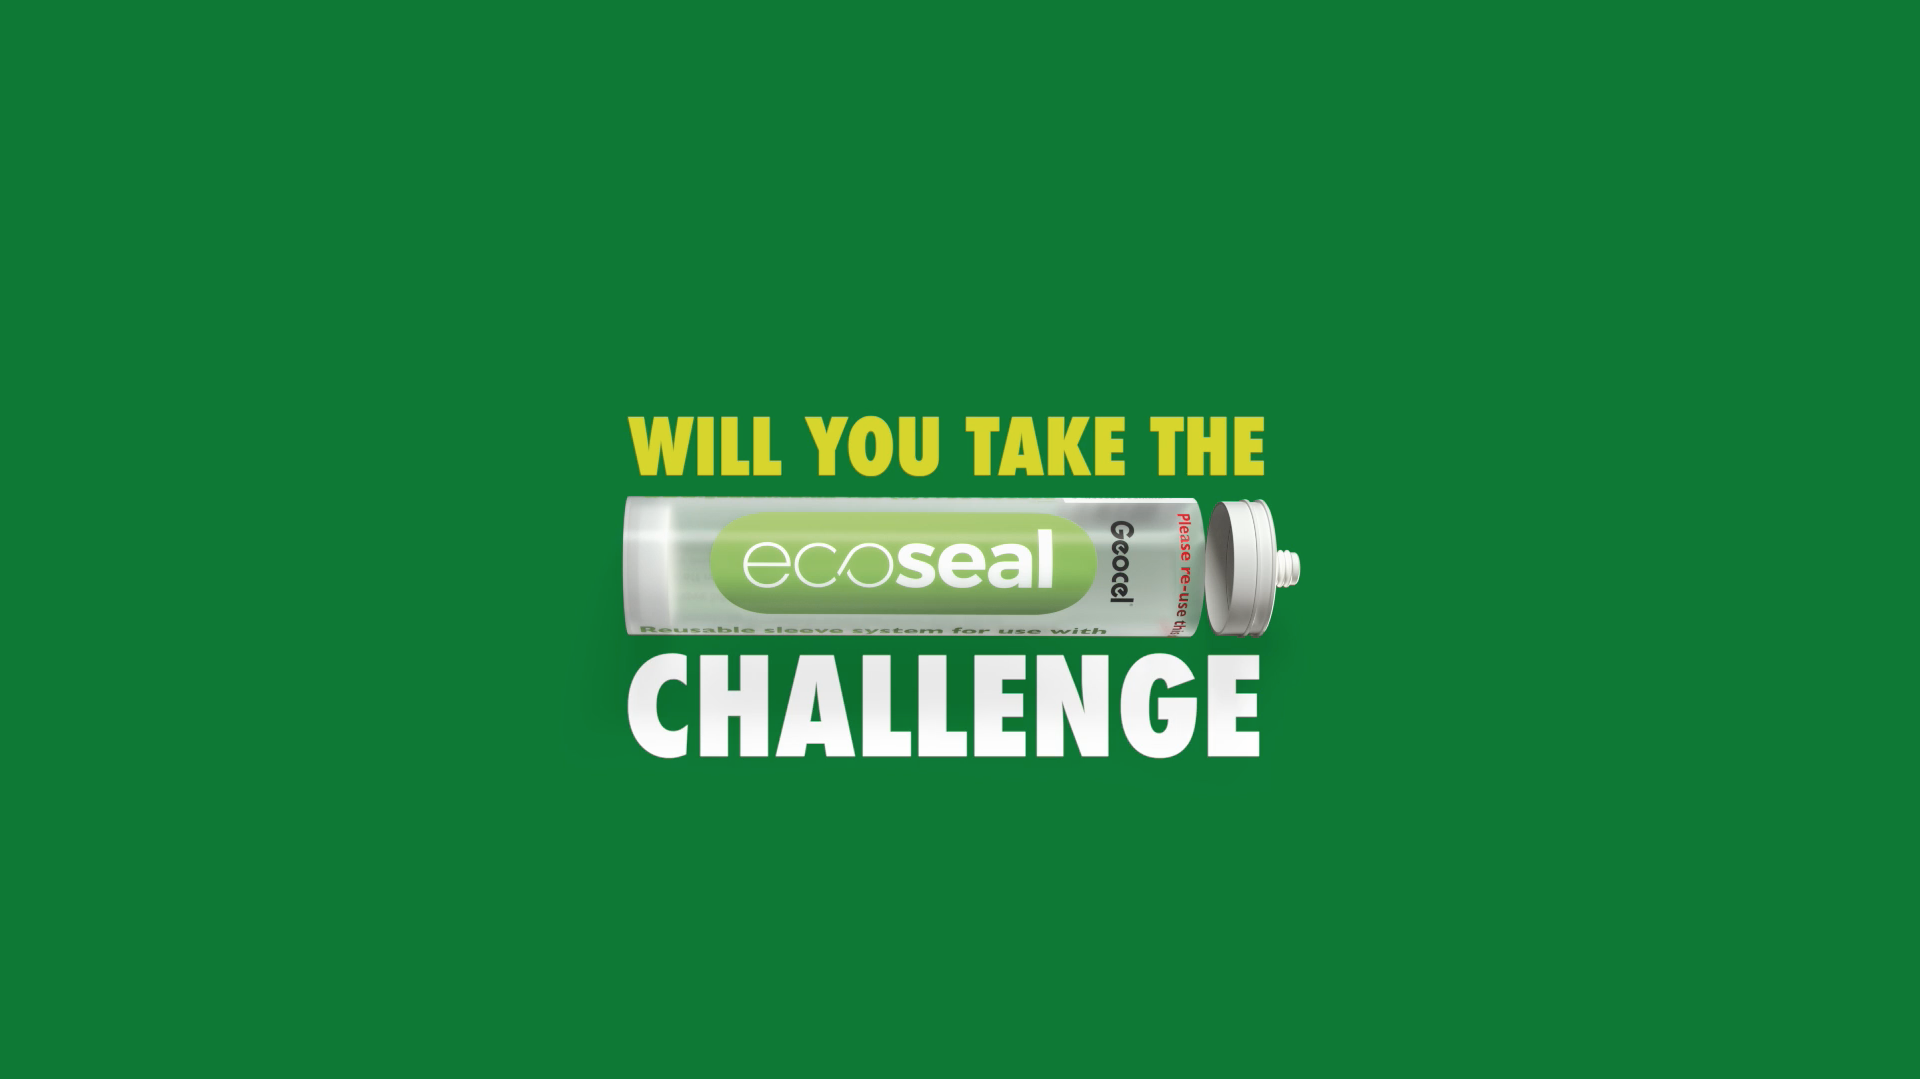 Will you take the ecoSEAL challenge?